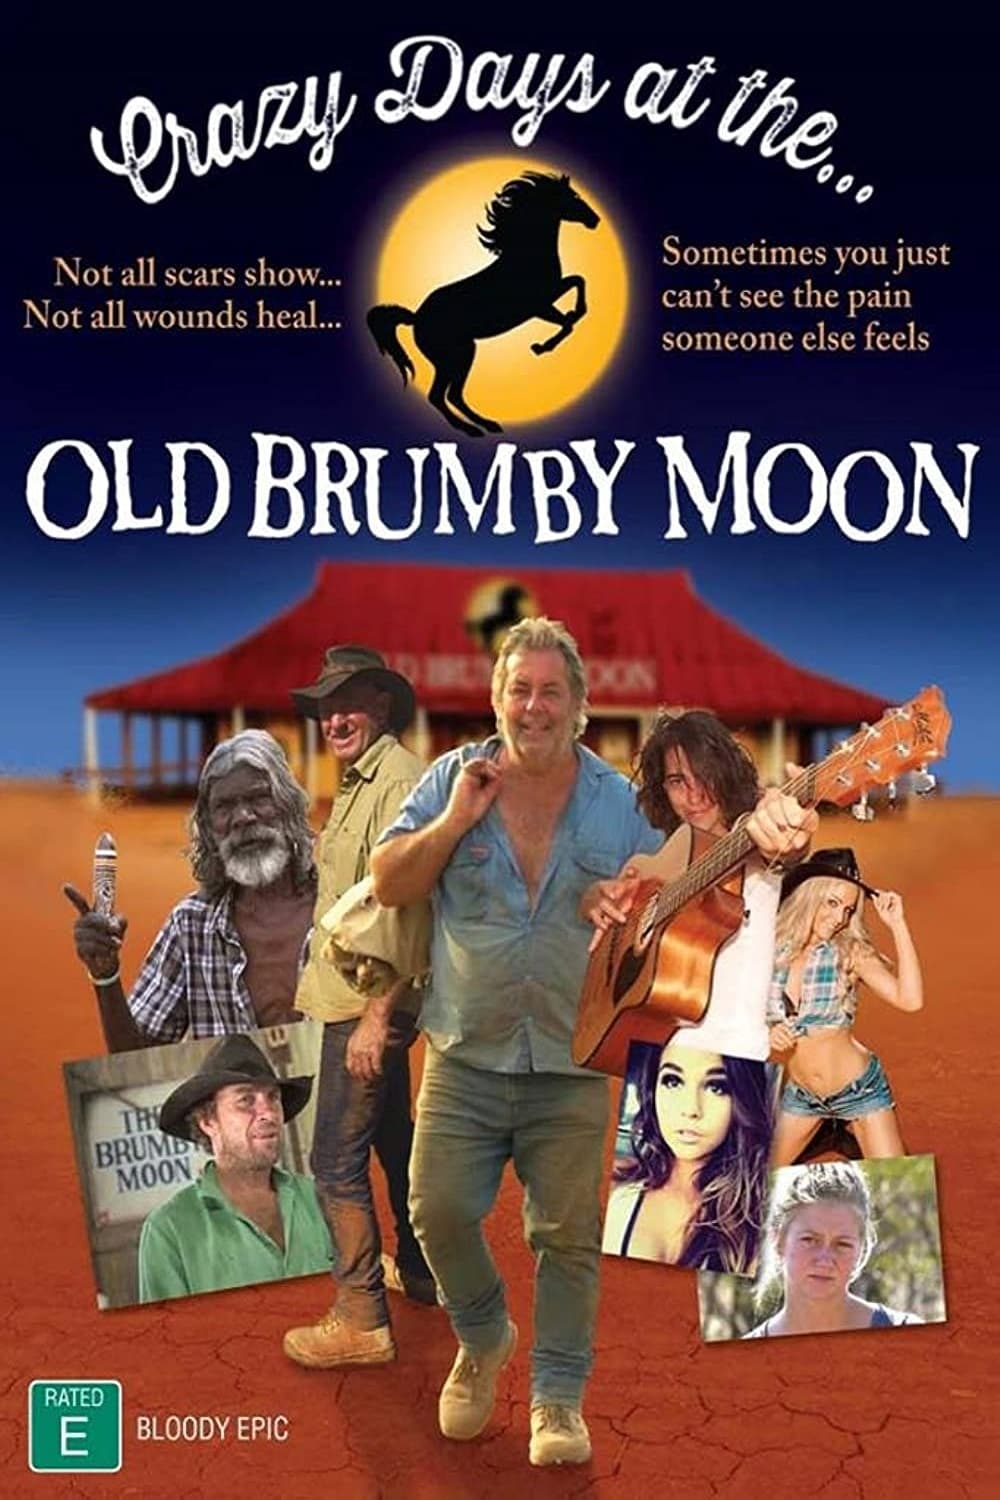 Crazy Days at the old Brumby Moon